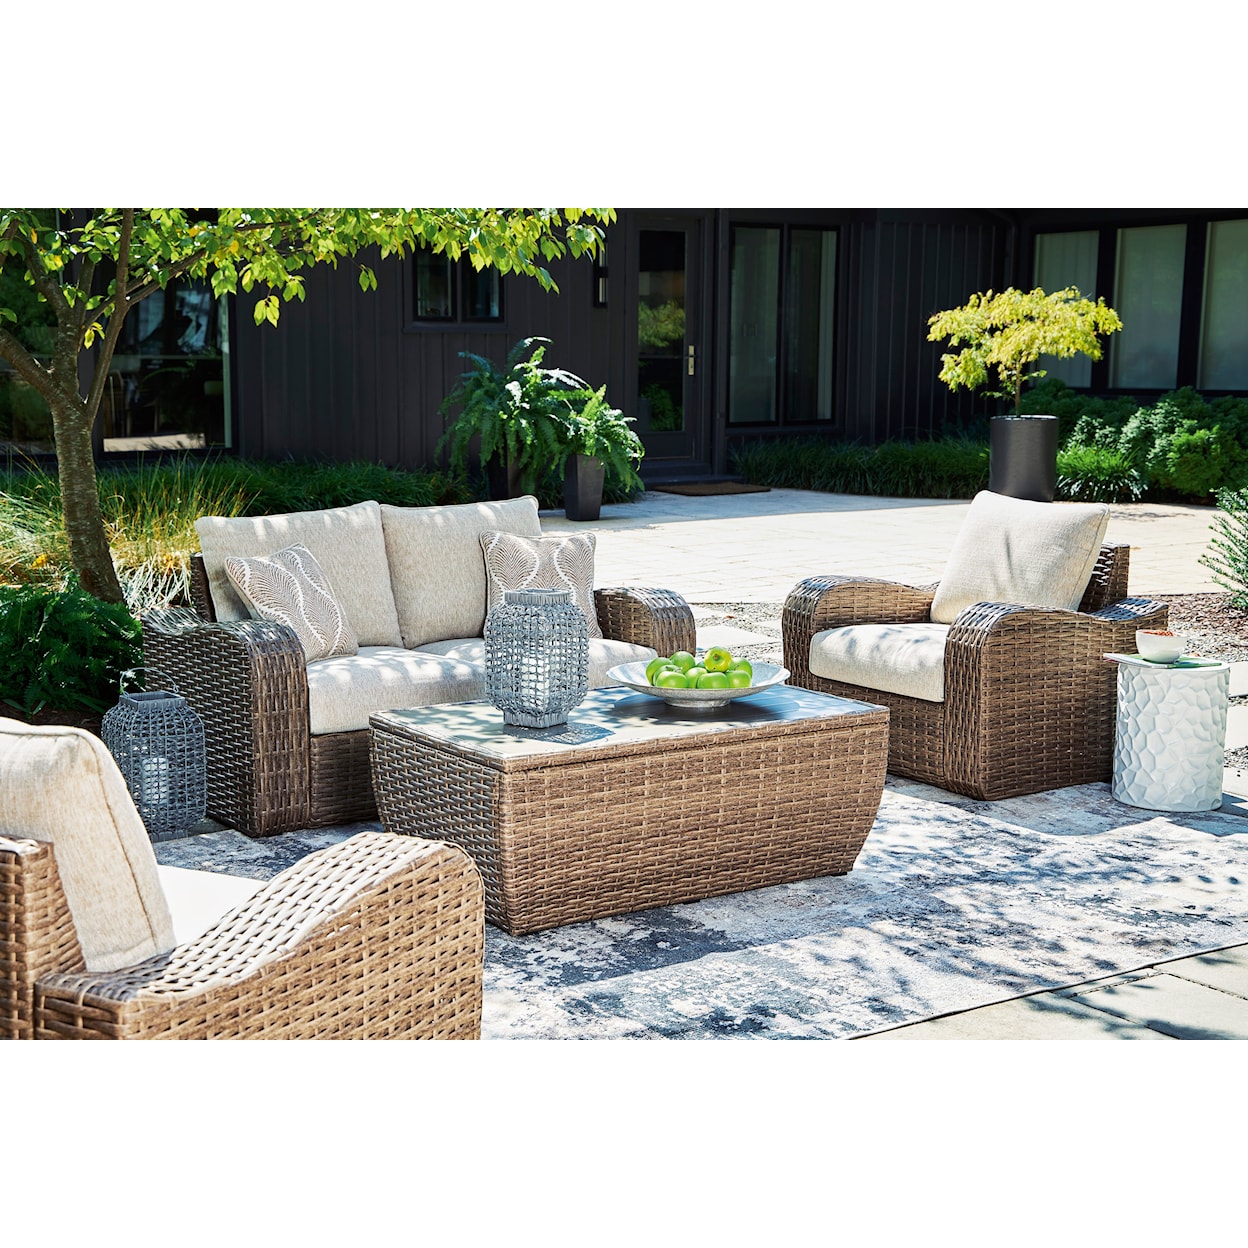 Michael Alan Select Sandy Bloom Outdoor Lounge Chair with Cushion